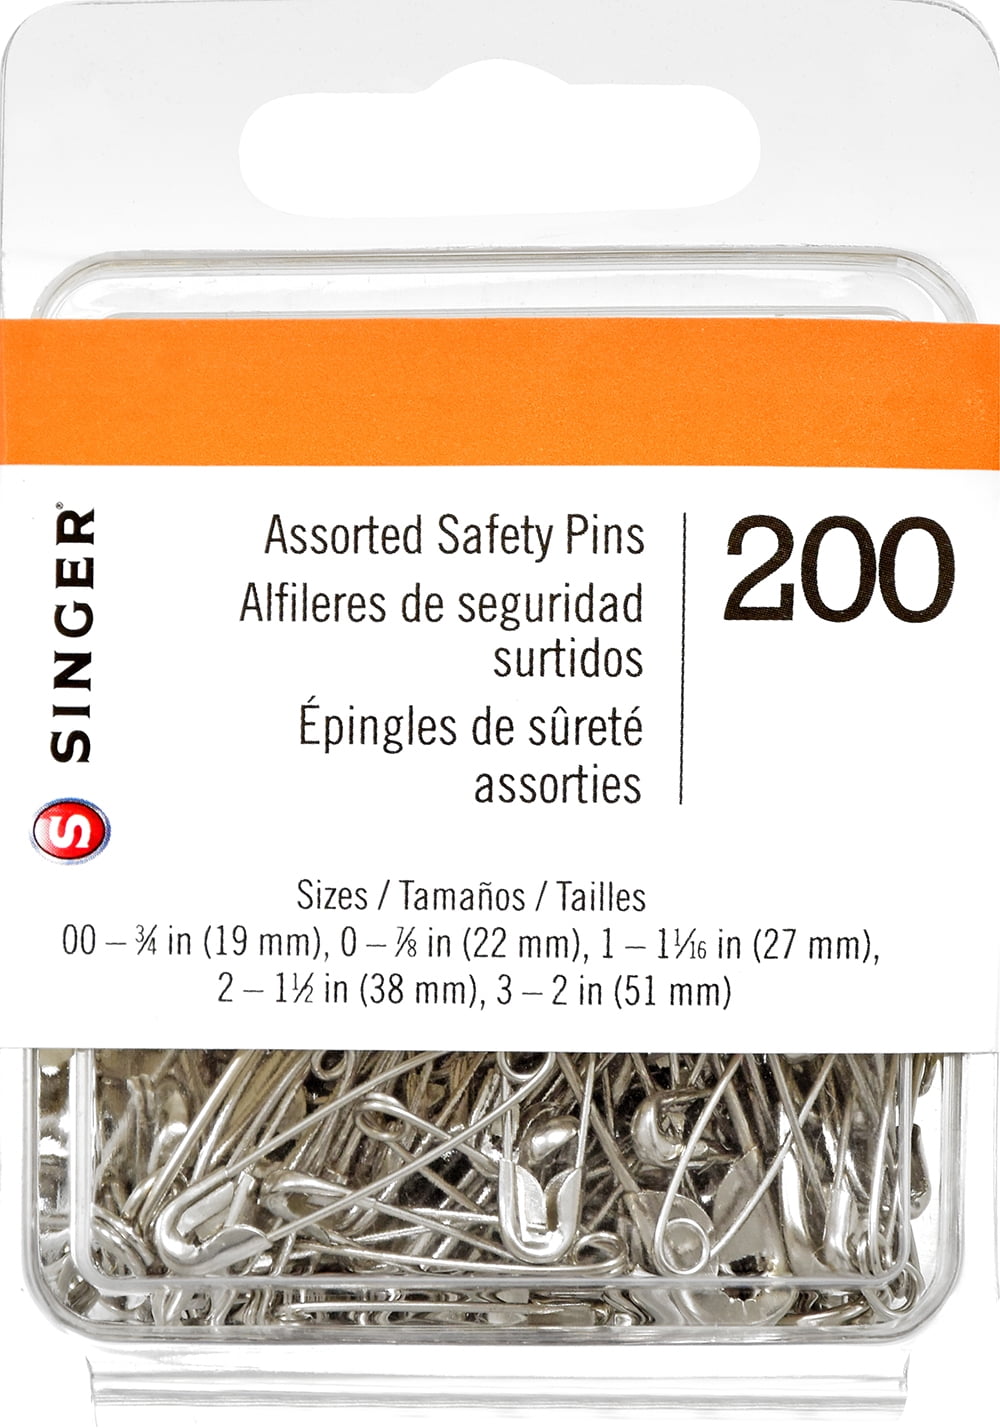 SINGER Sewing Kit 01927 / SINGER Safety Pins 00226 & Professional Style  00296